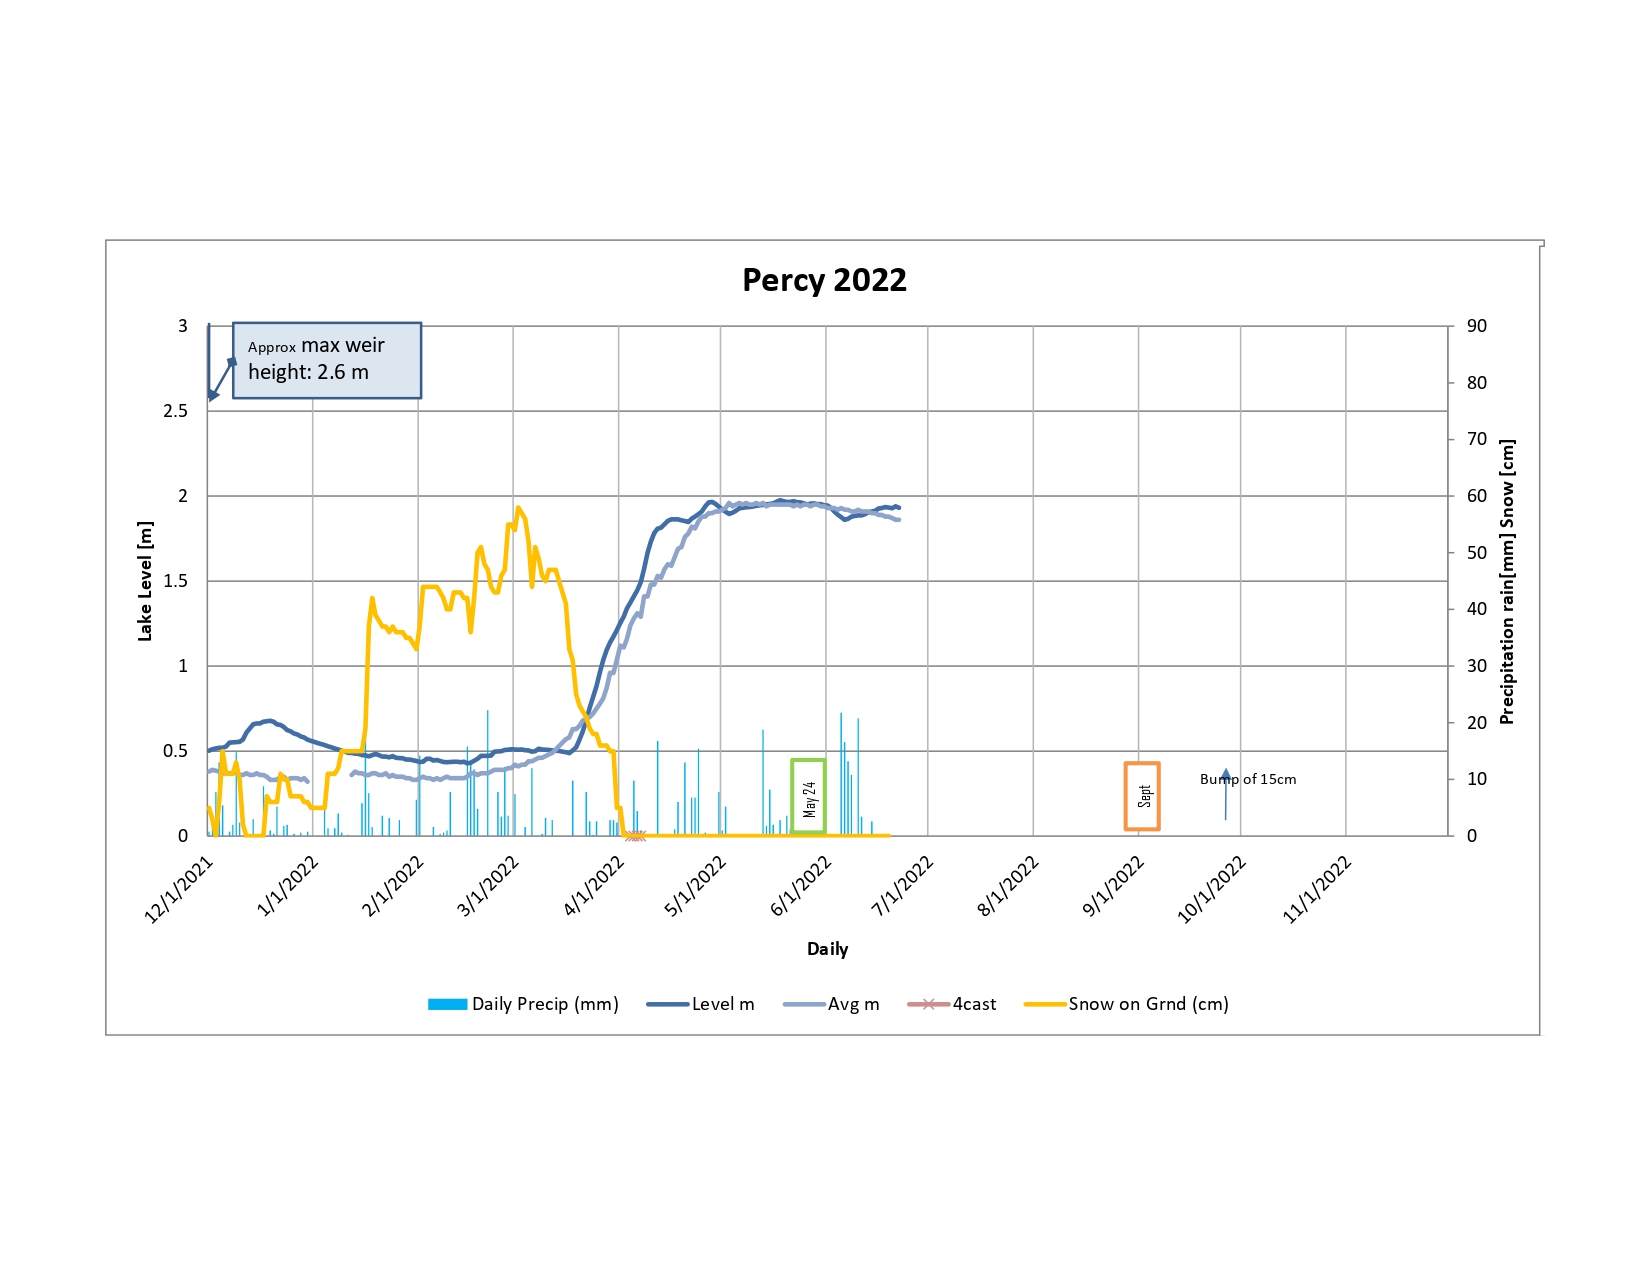 A graph showing the water level fluctuations on Percy Lake.